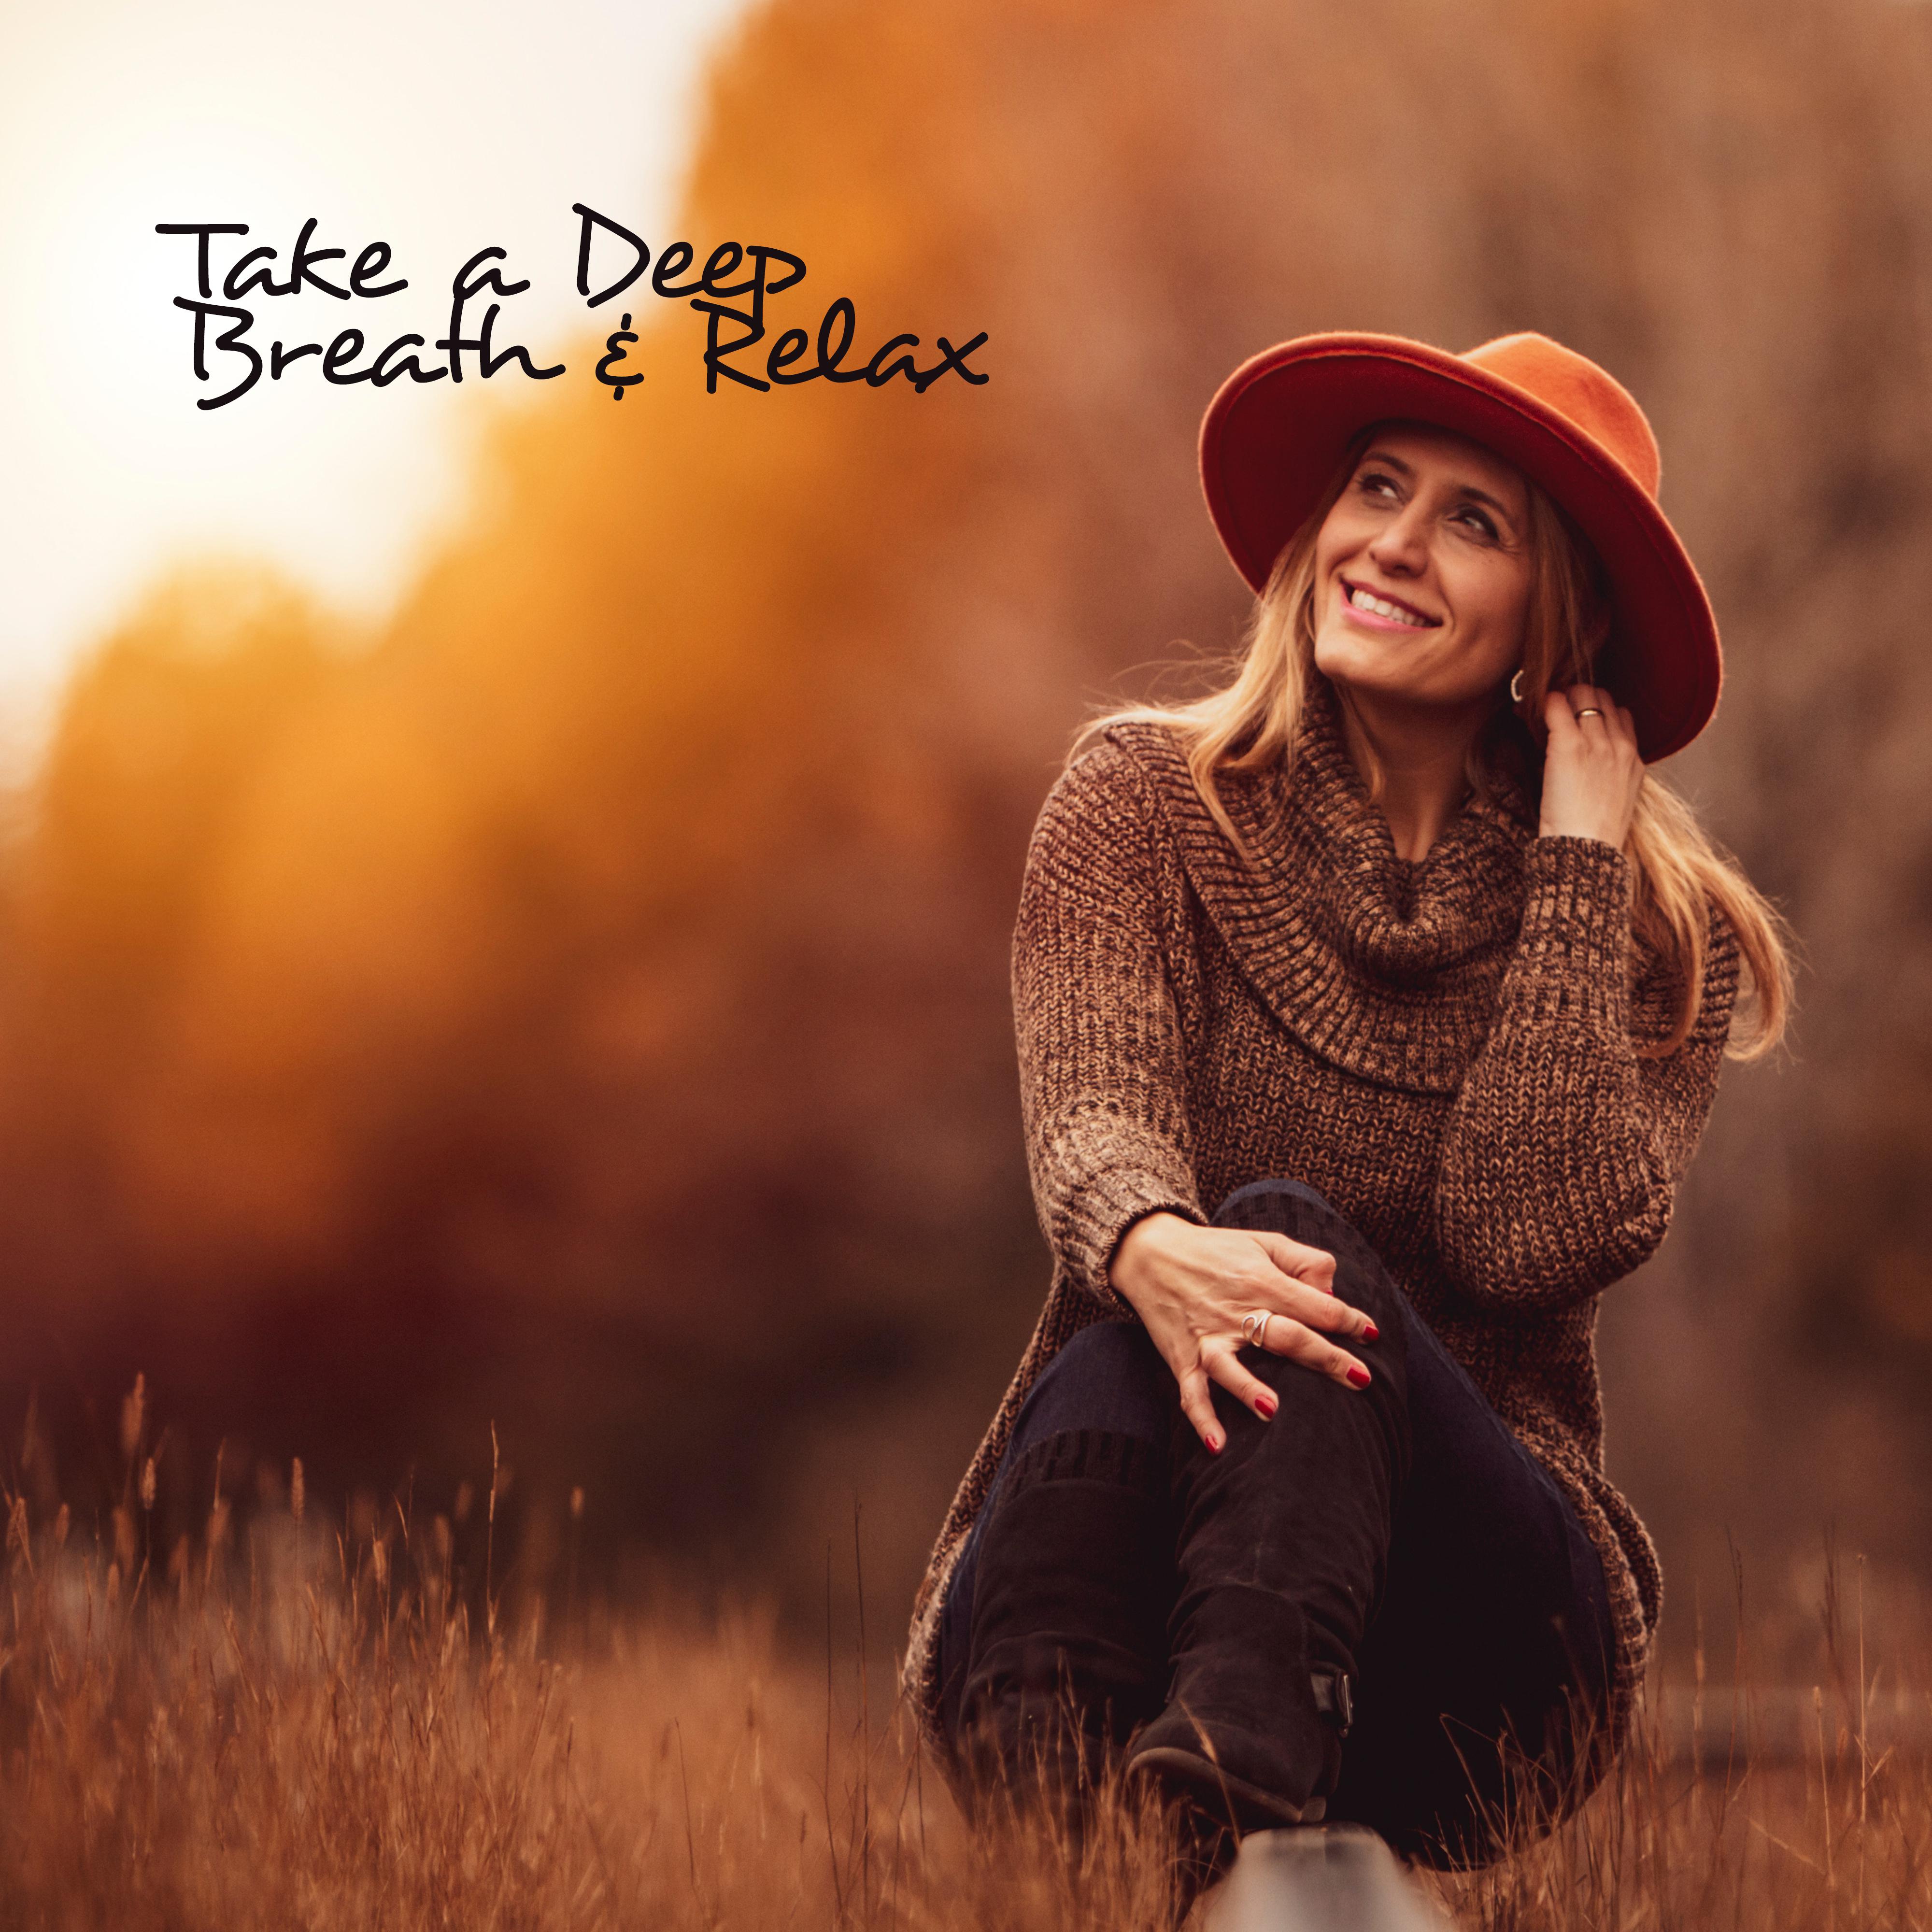 Take a Deep Breath & Relax – New Age Meditation & Relaxing Music for Calming Down, Stress Relief & Emotional Healing